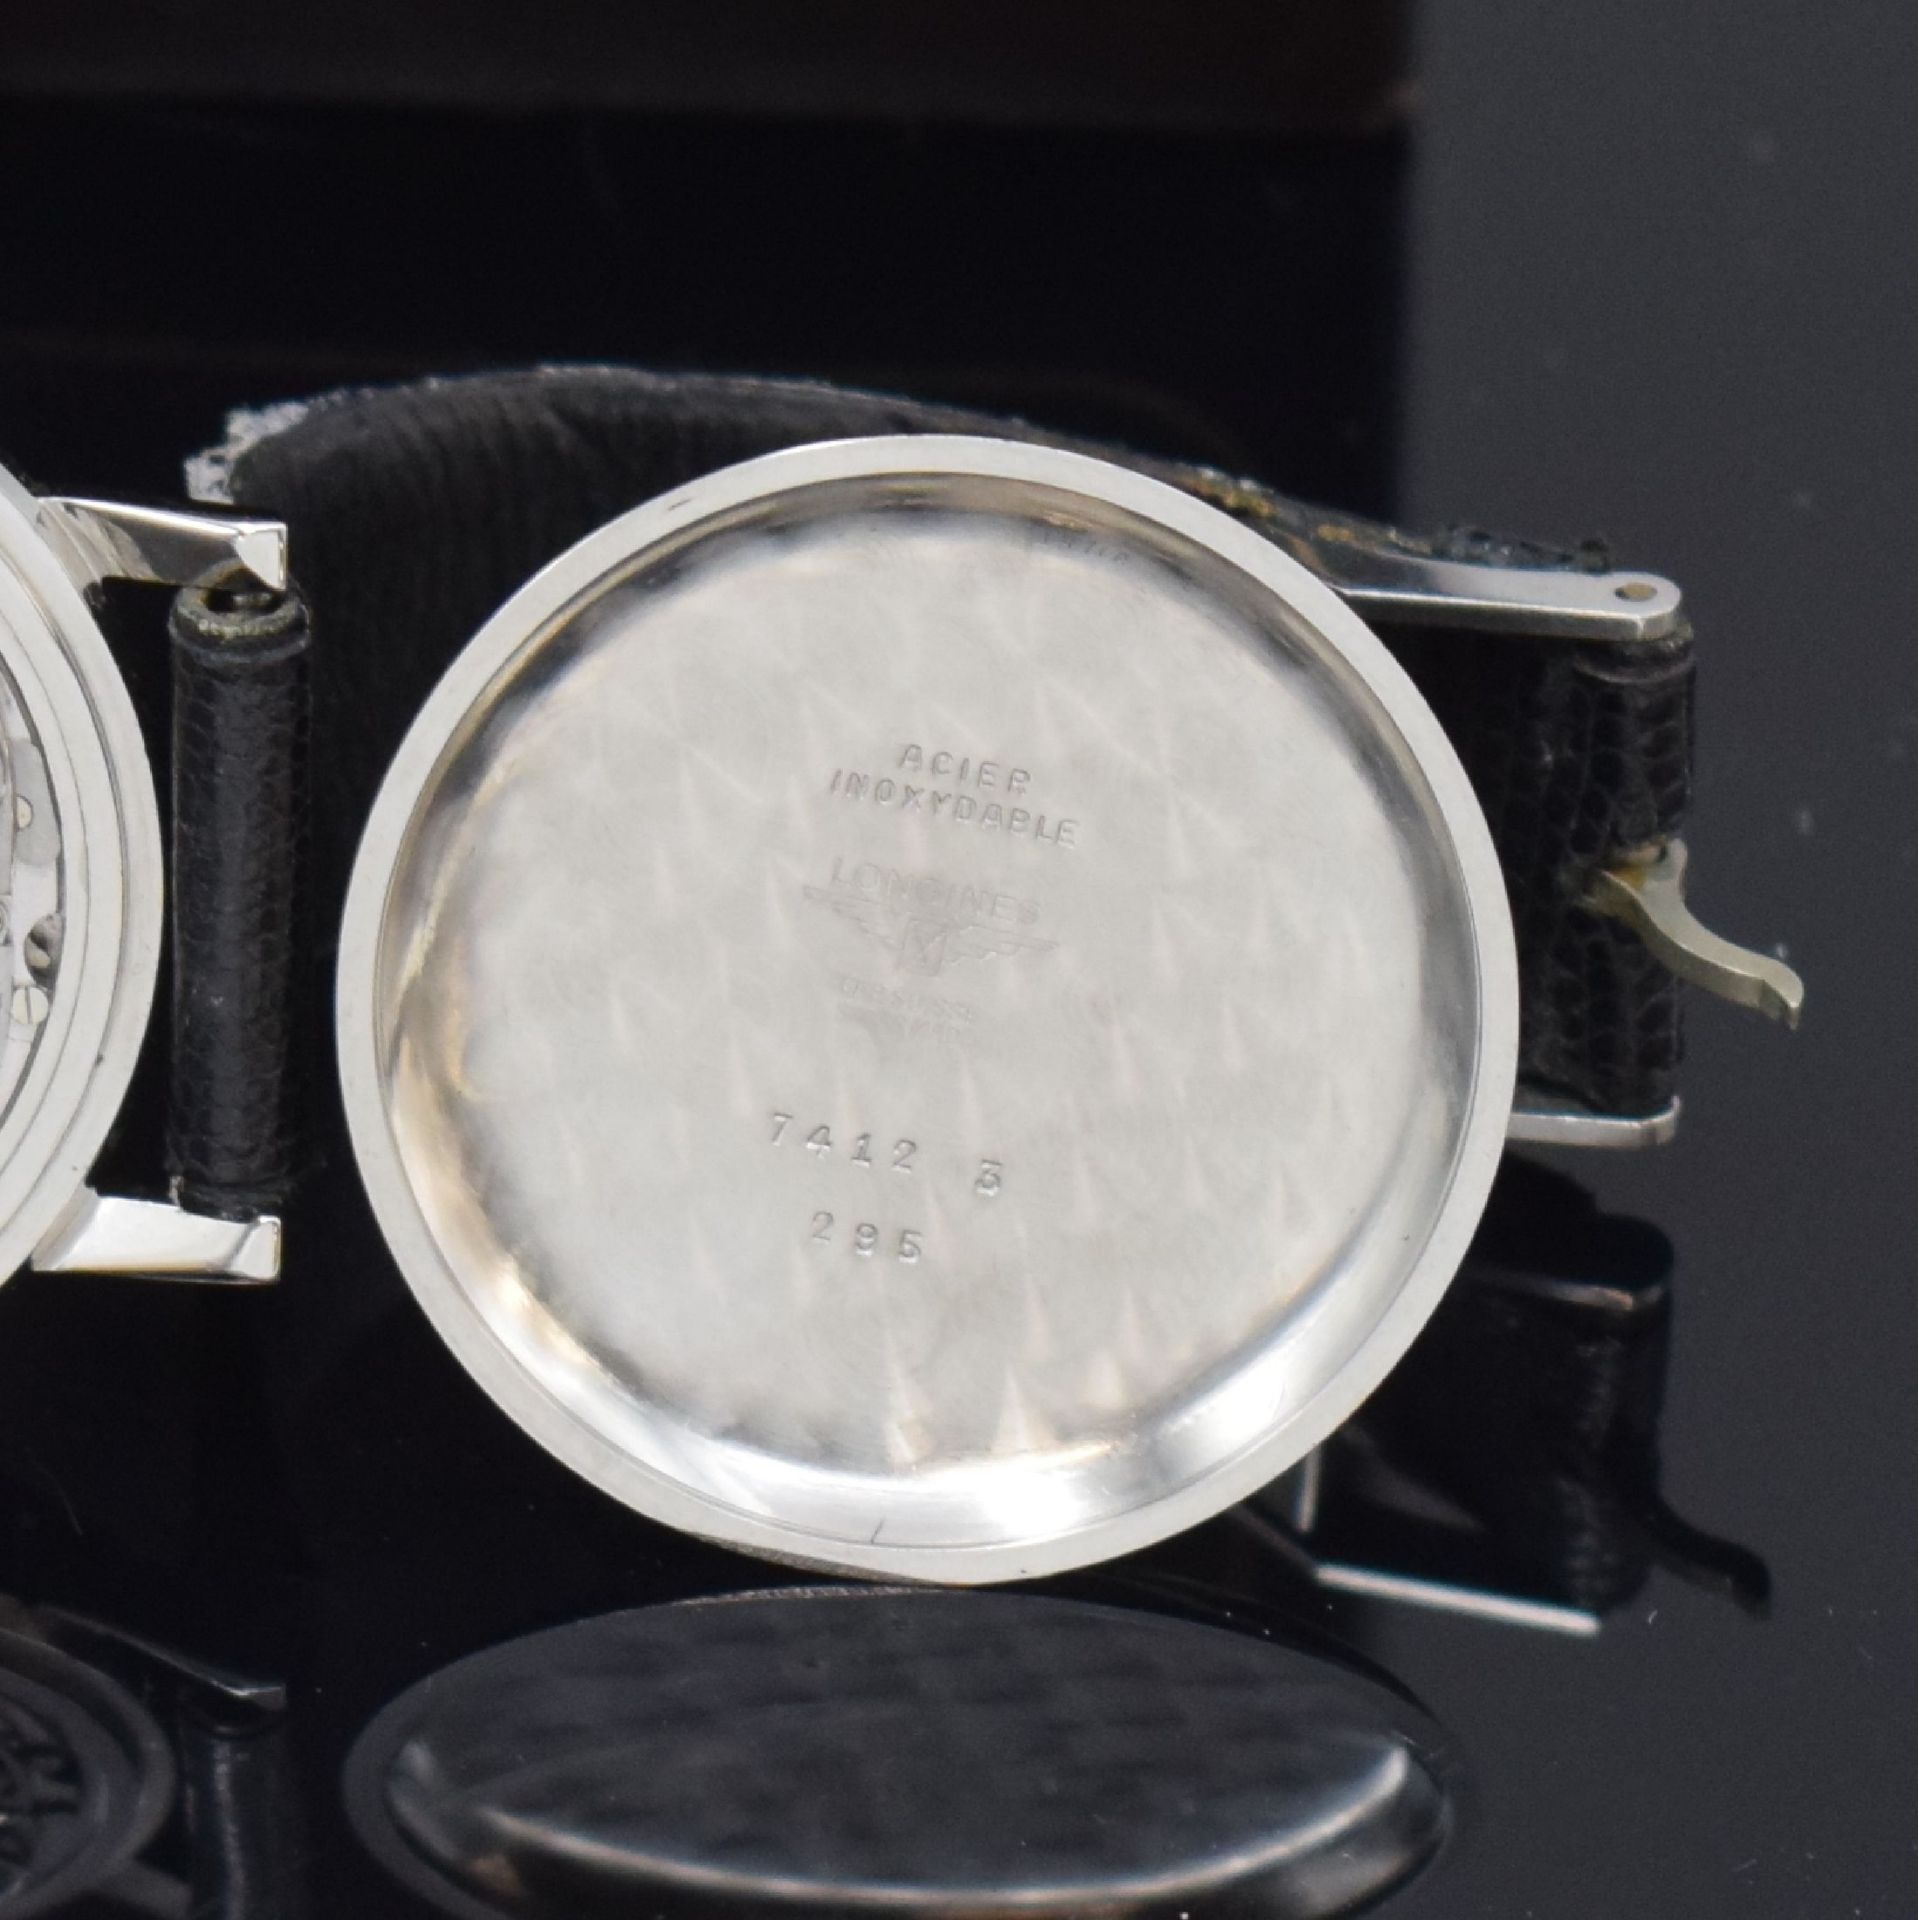 LONGINES Flyback-Schaltradchronograph Referenz 7412, - Image 7 of 8